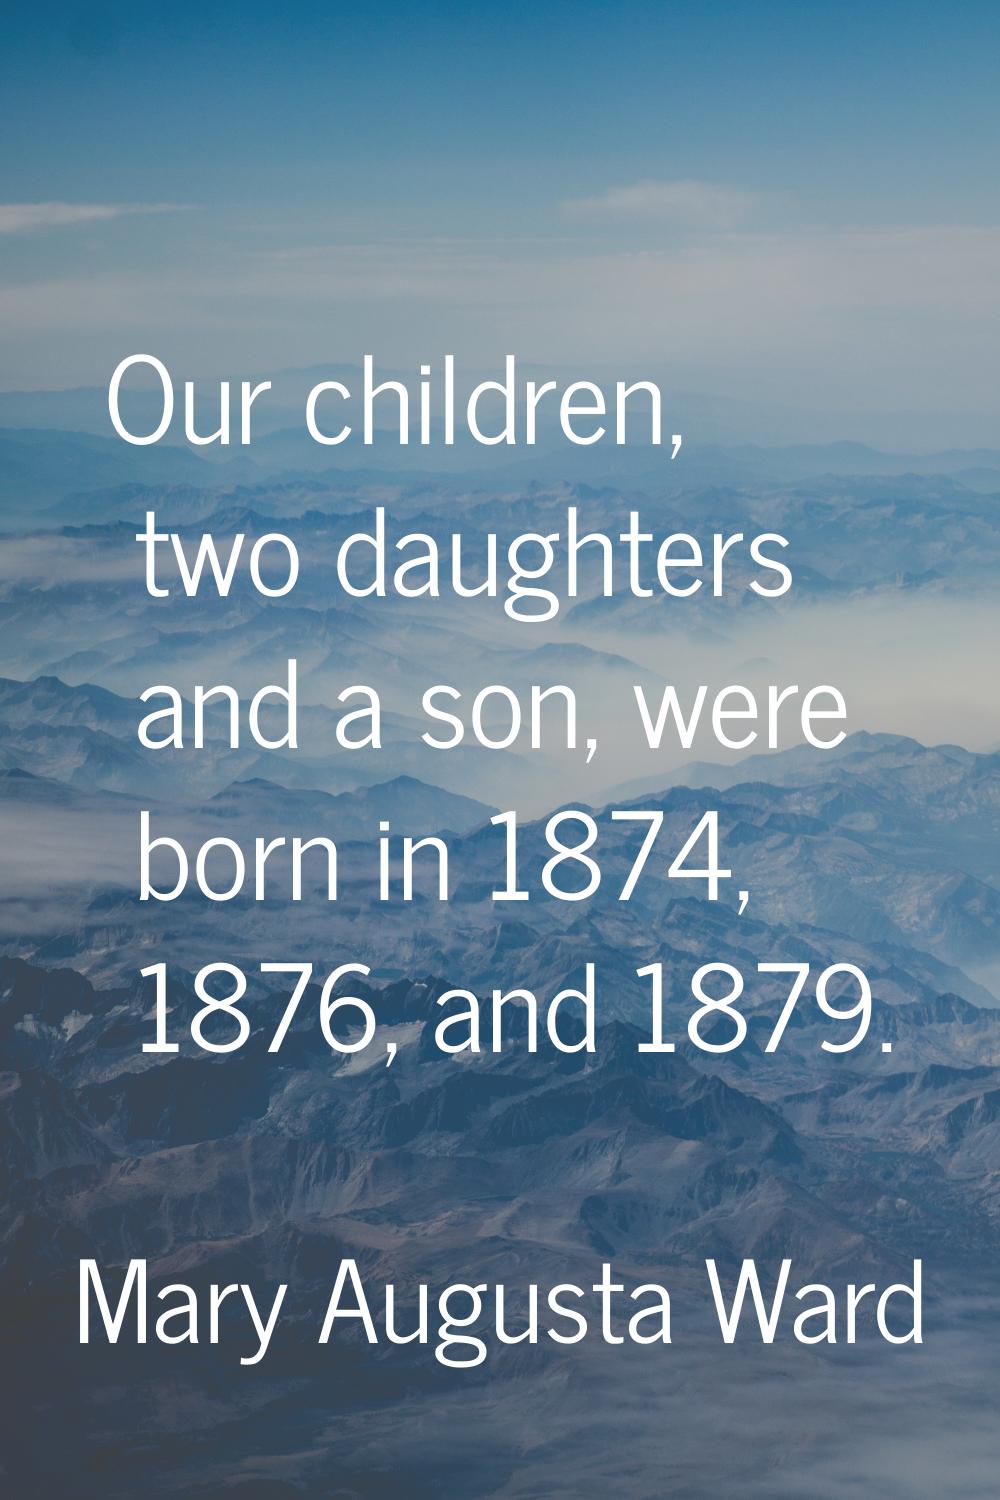 Our children, two daughters and a son, were born in 1874, 1876, and 1879.